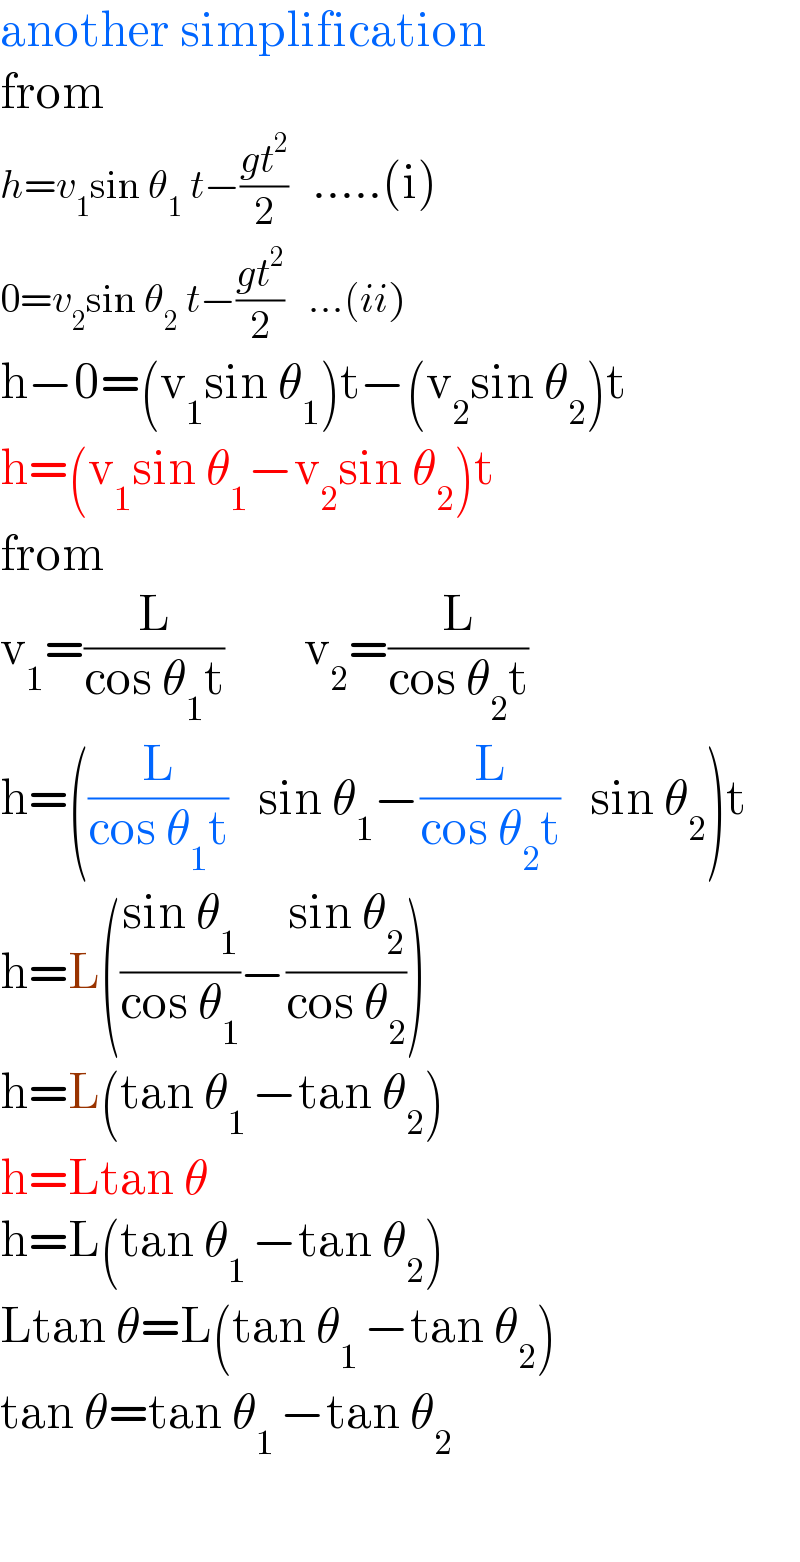 another simplification  from   h=v_1 sin θ_1  t−((gt^2 )/2)   .....(i)  0=v_2 sin θ_2  t−((gt^2 )/2)   ...(ii)  h−0=(v_1 sin θ_1 )t−(v_2 sin θ_2 )t   h=(v_1 sin θ_1 −v_2 sin θ_2 )t  from   v_1 =(L/(cos θ_1 t))        v_2 =(L/(cos θ_2 t))  h=((L/(cos θ_1 t))   sin θ_1 −(L/(cos θ_2 t))   sin θ_2 )t  h=L(((sin θ_1 )/(cos θ_1 ))−((sin θ_2 )/(cos θ_2 )))  h=L(tan θ_(1 ) −tan θ_2 )  h=Ltan θ  h=L(tan θ_(1 ) −tan θ_2 )  Ltan θ=L(tan θ_(1 ) −tan θ_2 )  tan θ=tan θ_(1 ) −tan θ_2     